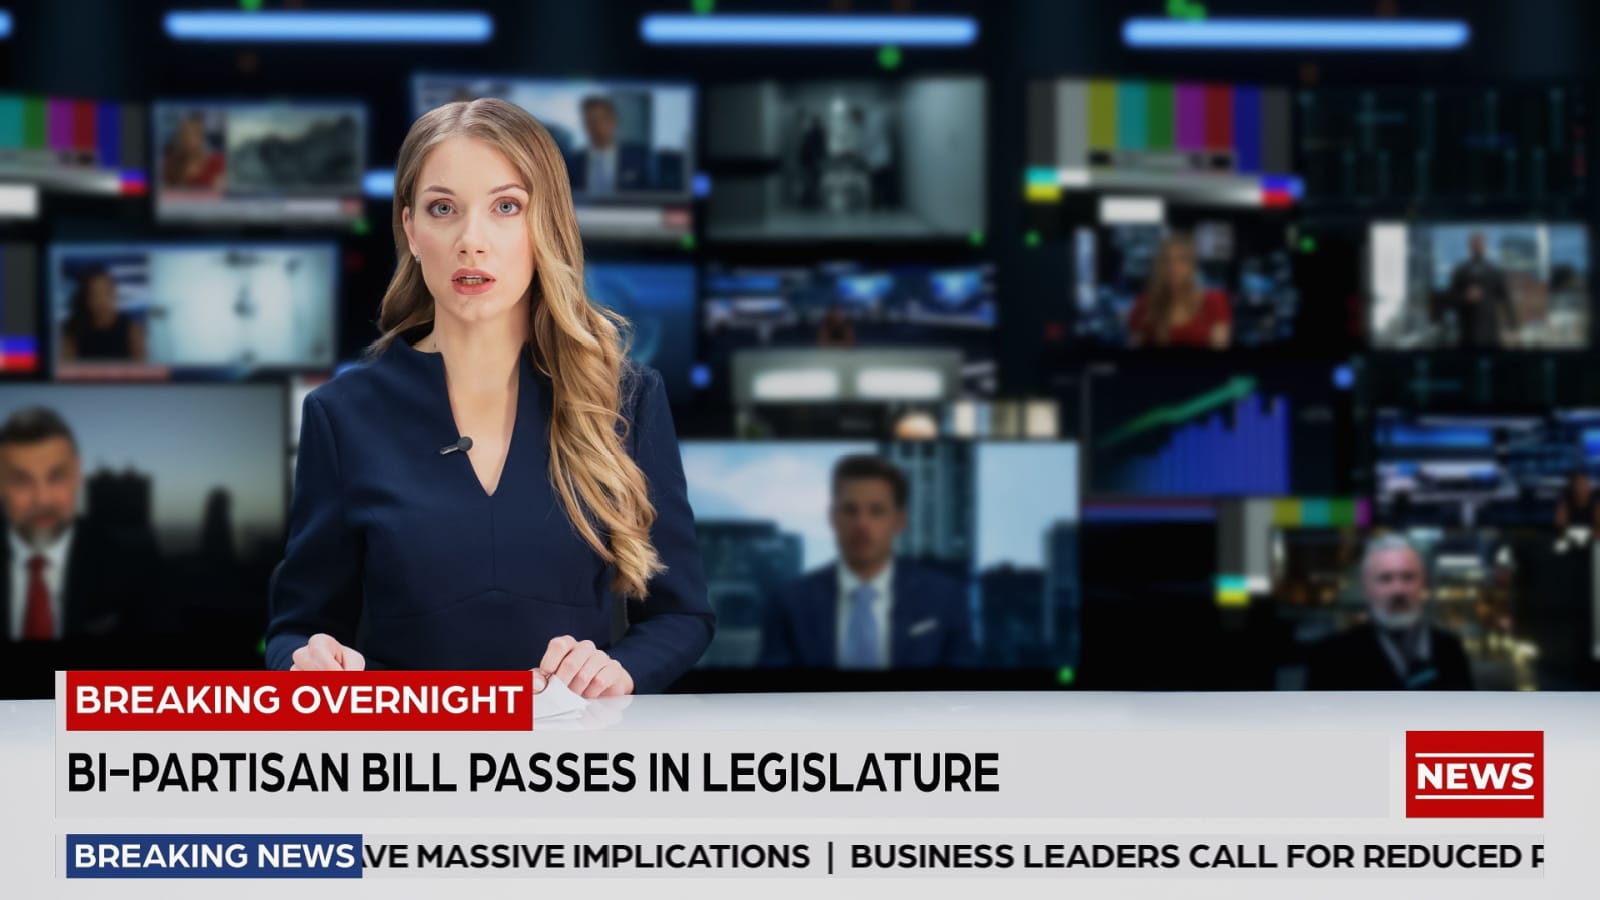 TV Live News Program with Professional Female Presenter Reporting. Television Cable Channel Anchorwoman Talks. Mockup of Network Broadcasting in Newsroom Studio Concept. Medium